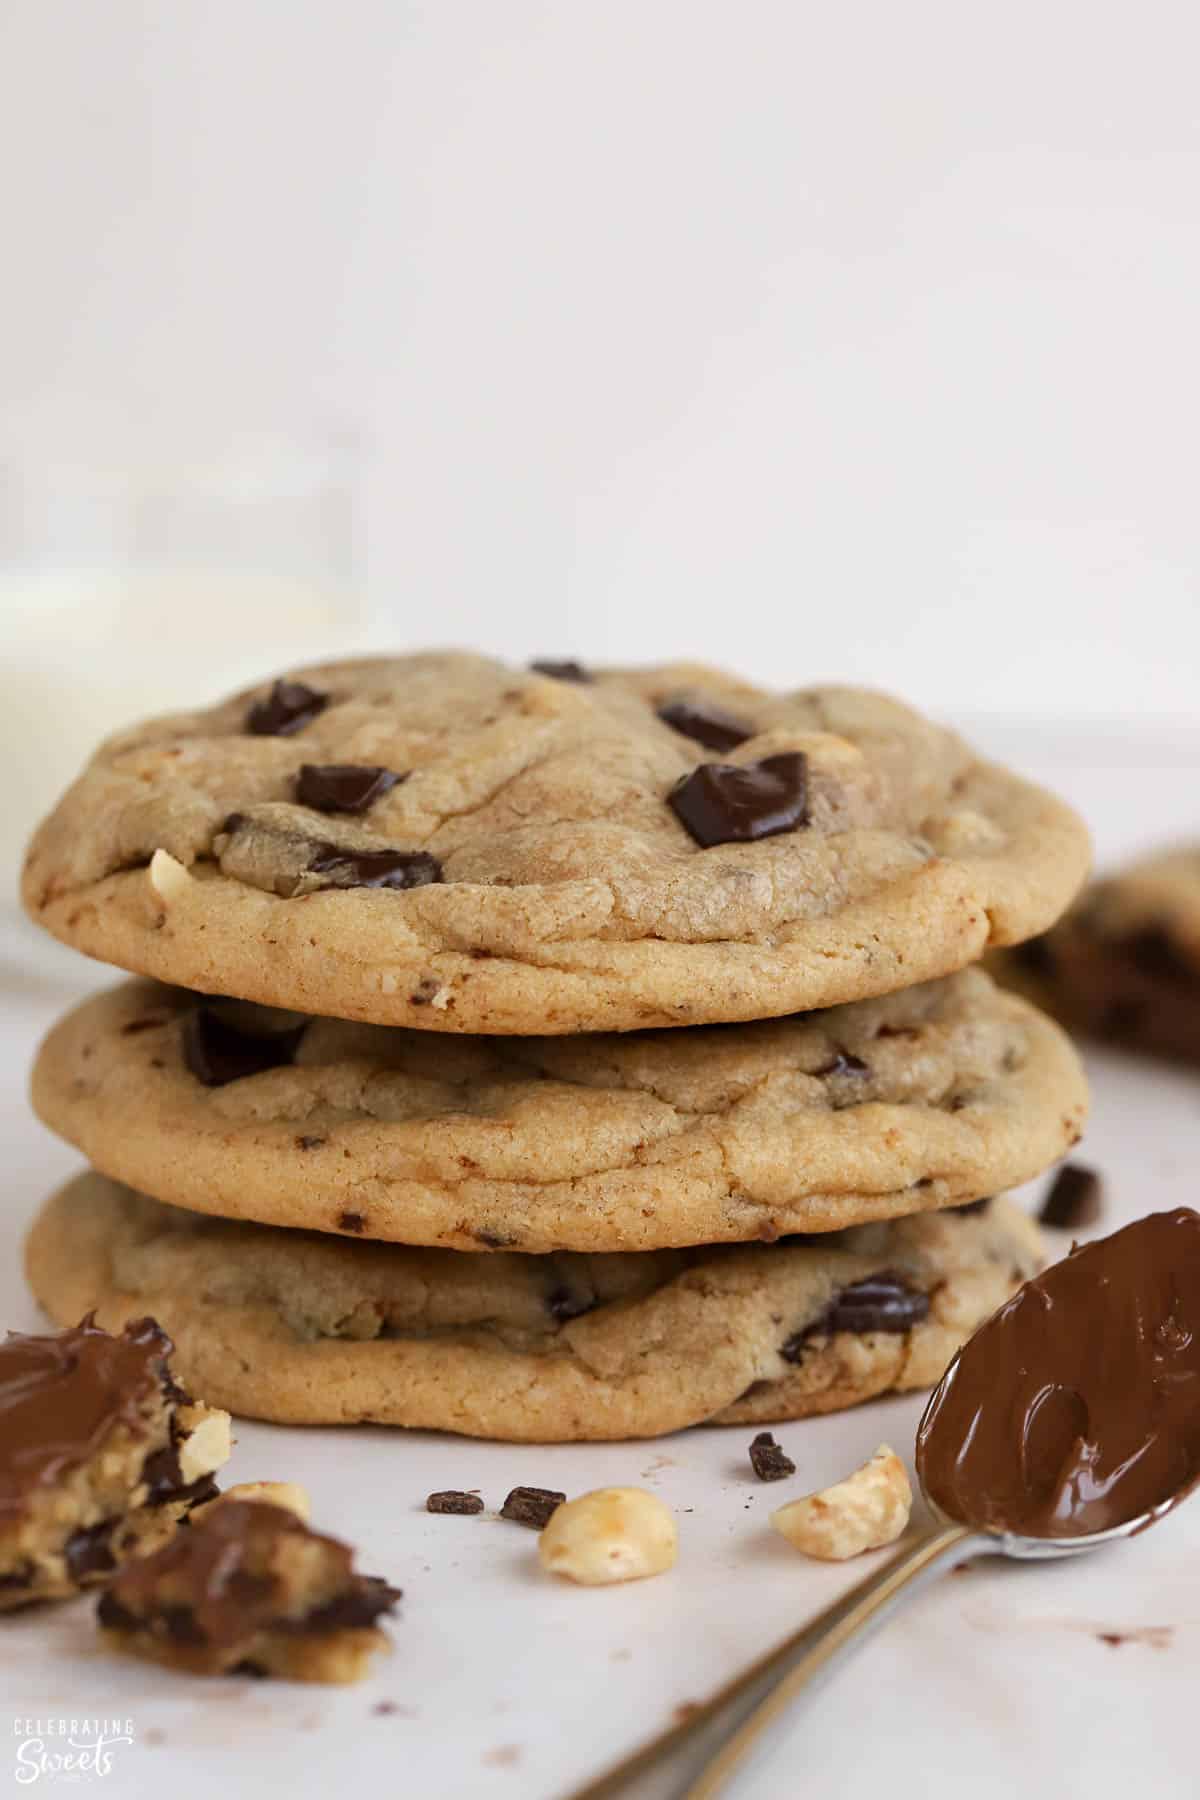 Stack of three Nutella chocolate chip cookies next to a spoonful of Nutella